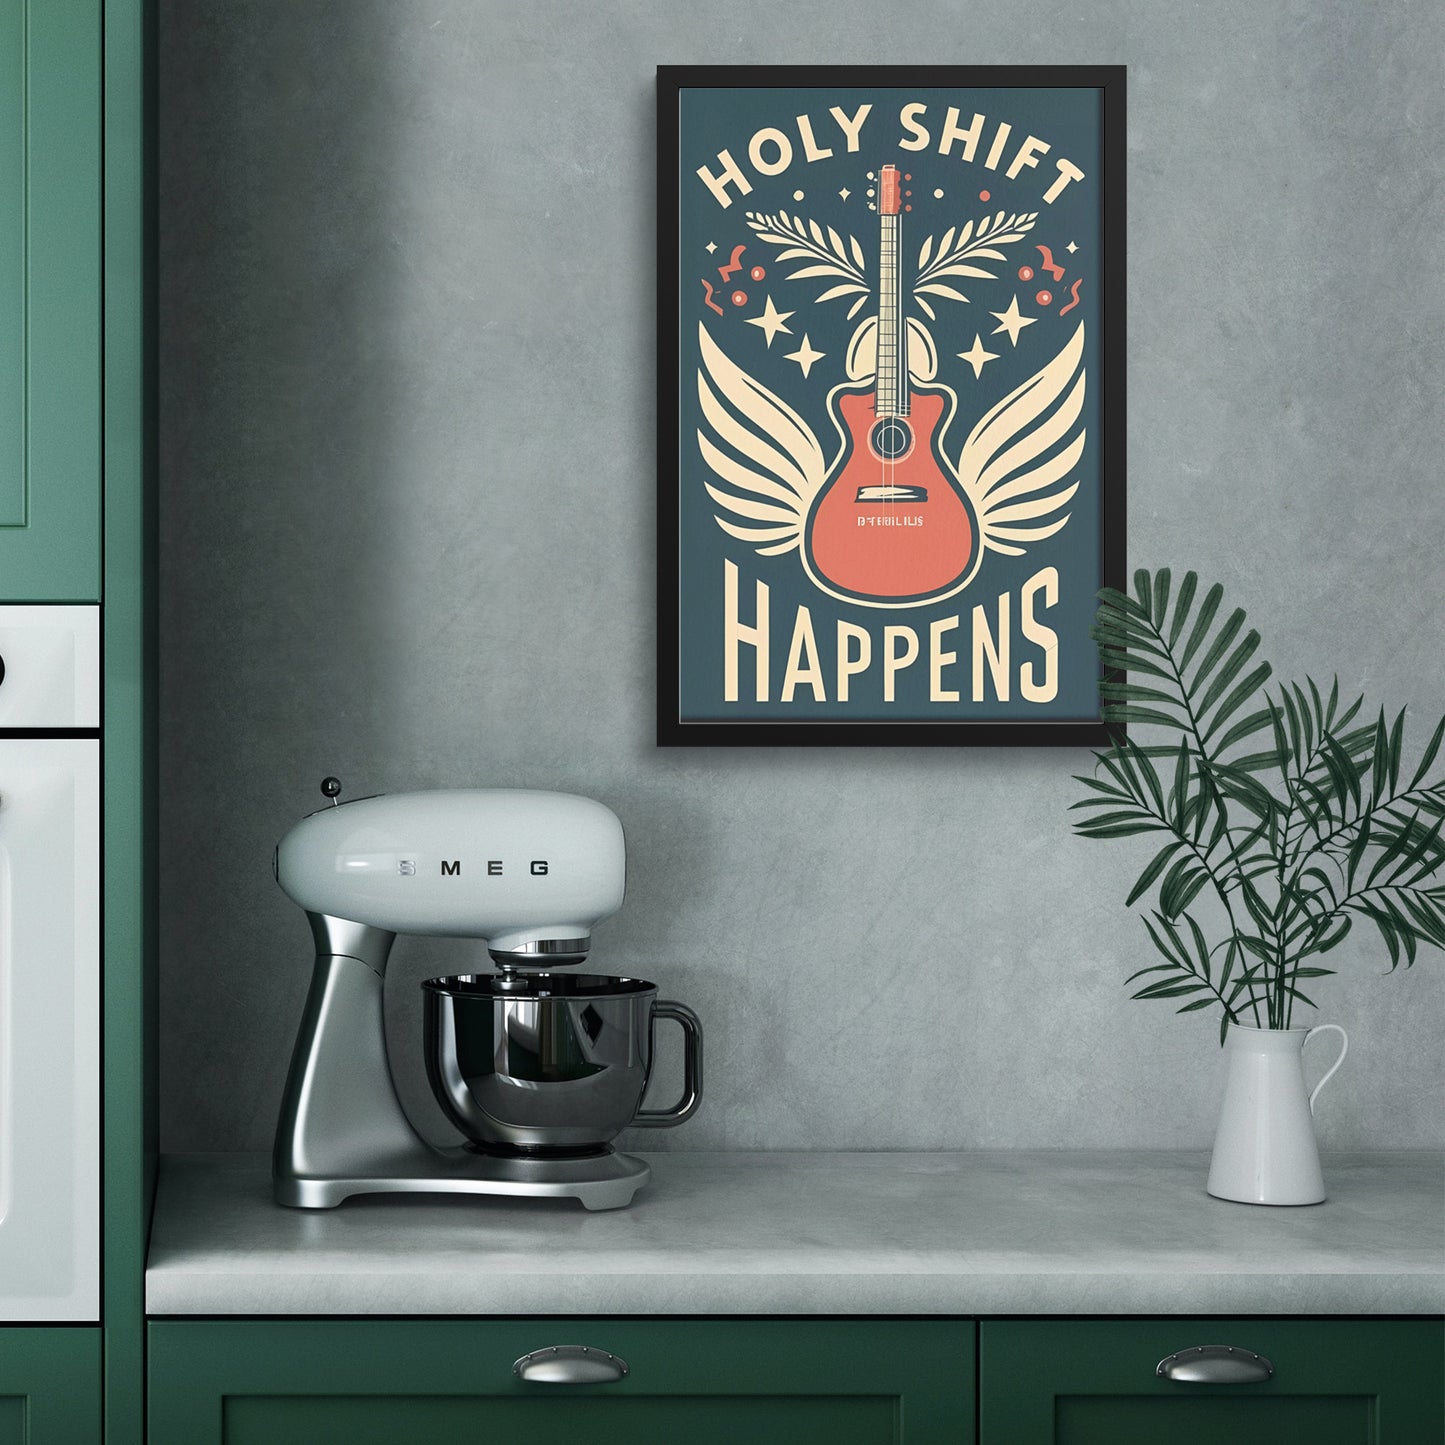 Holy Shift Happens Retro Style Guitar with Wings Framed Poster